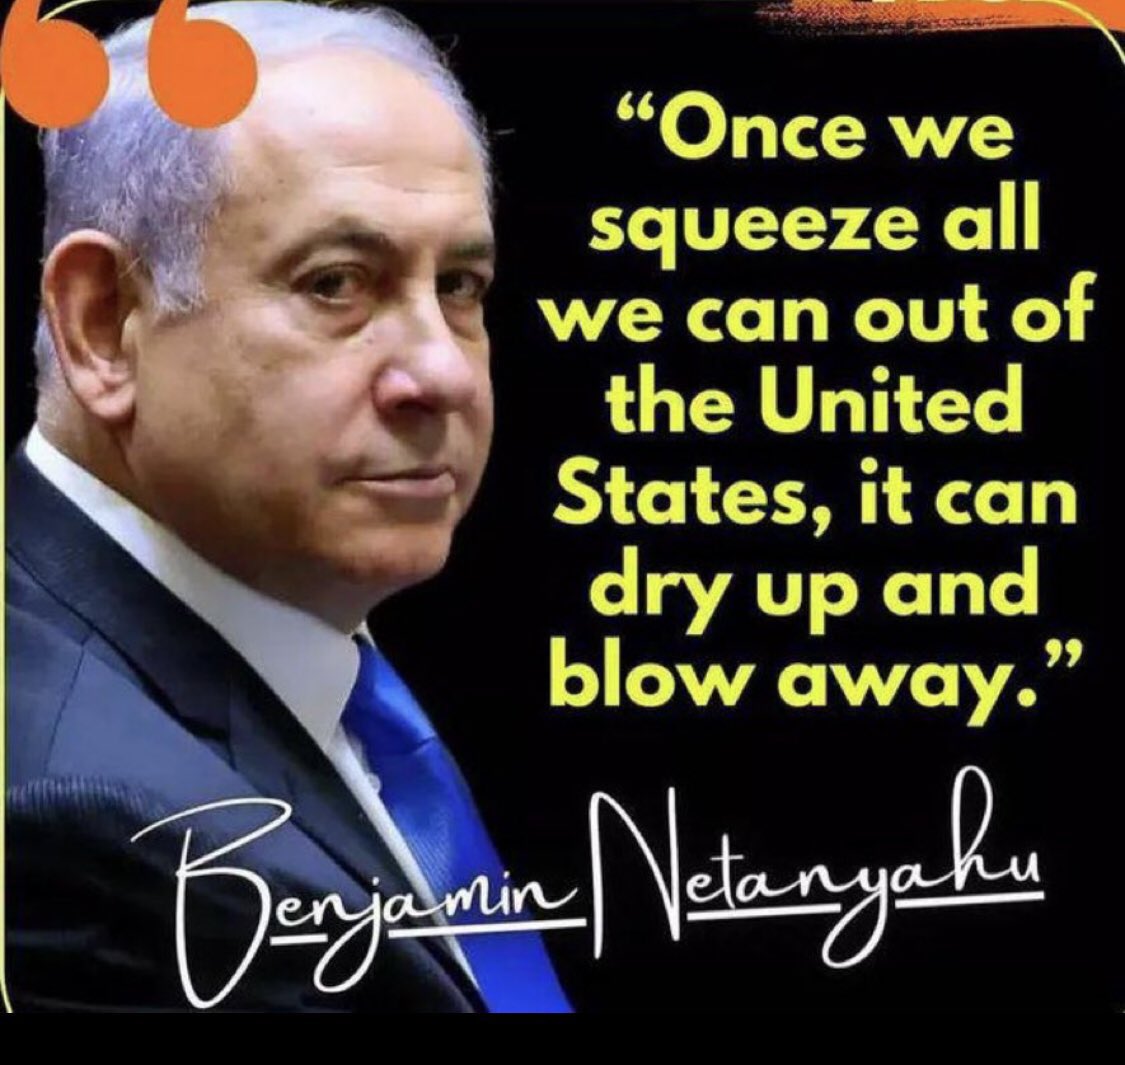 Protect your own borders. This idiot won't stop because you keep backing his dumb evil ass. Will end up backfiring. He's the one who originally backed Hamas to prevent a two state solution.